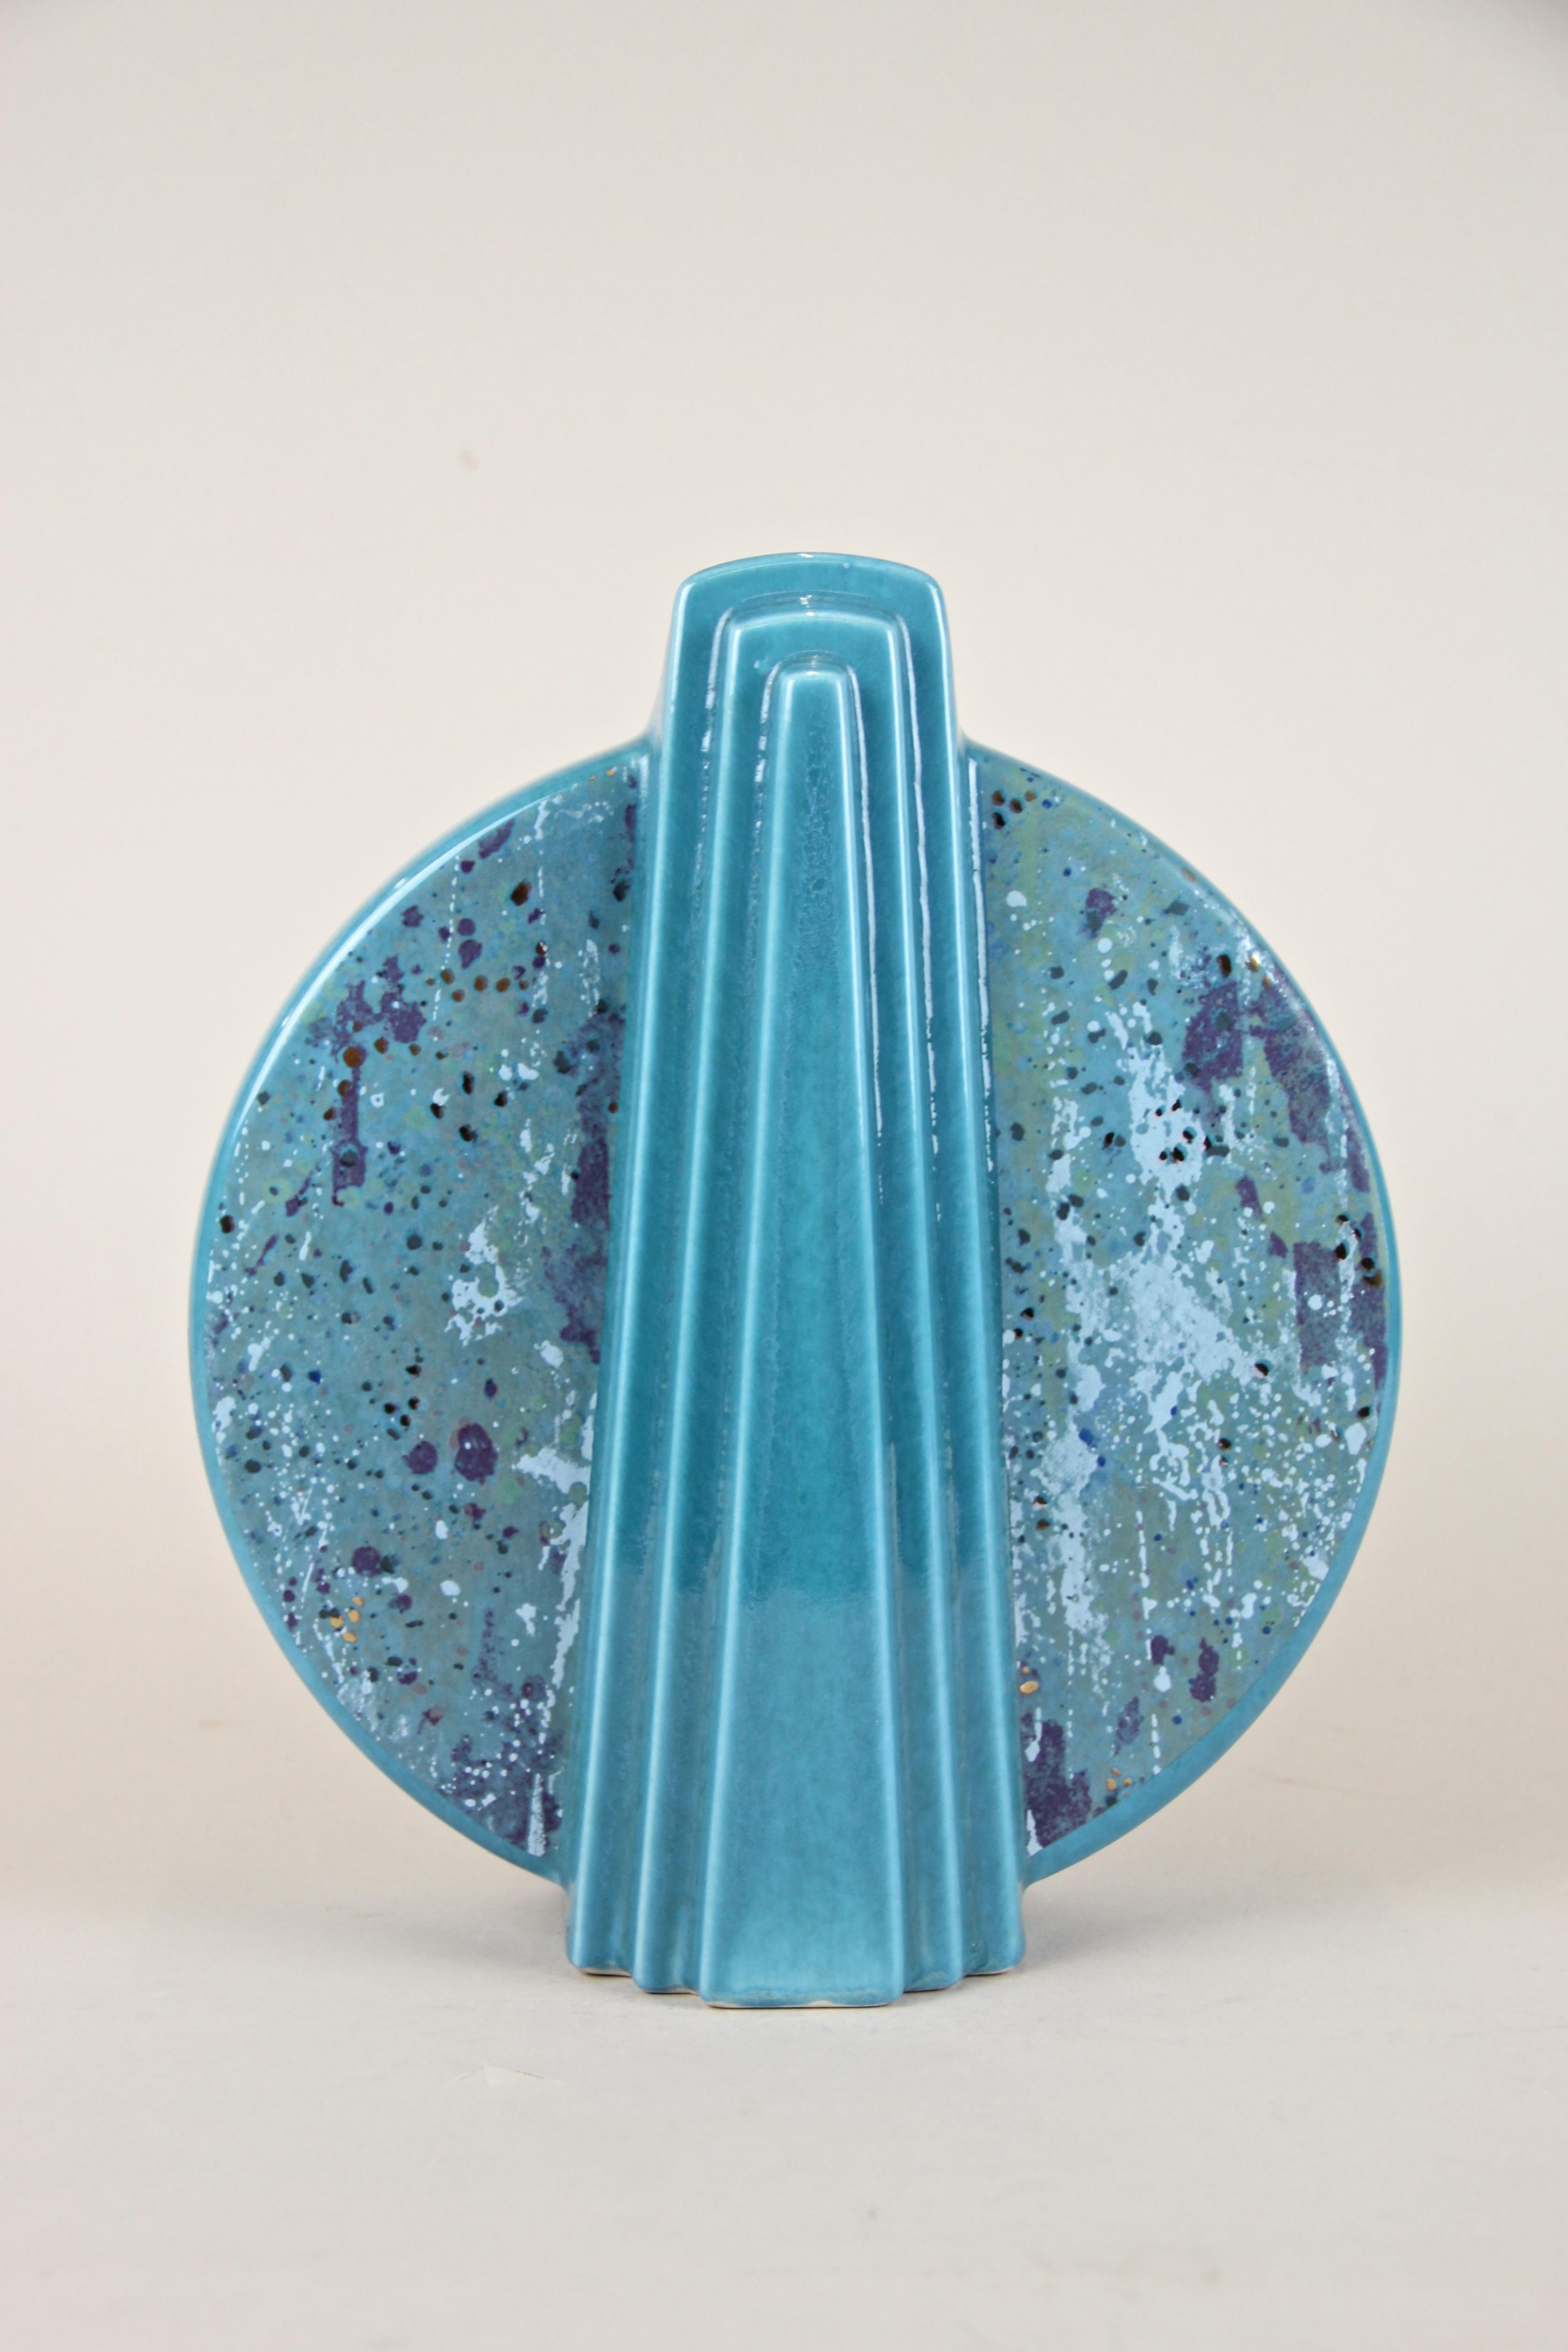 Decorative midcentury ceramic Vase out of Germany from circa 1950. The very special shaped body, reminding of the famous Art Deco era, shows a beautiful turquoise glazed surface adorned by a very unique splattered design in purple, light blue, green